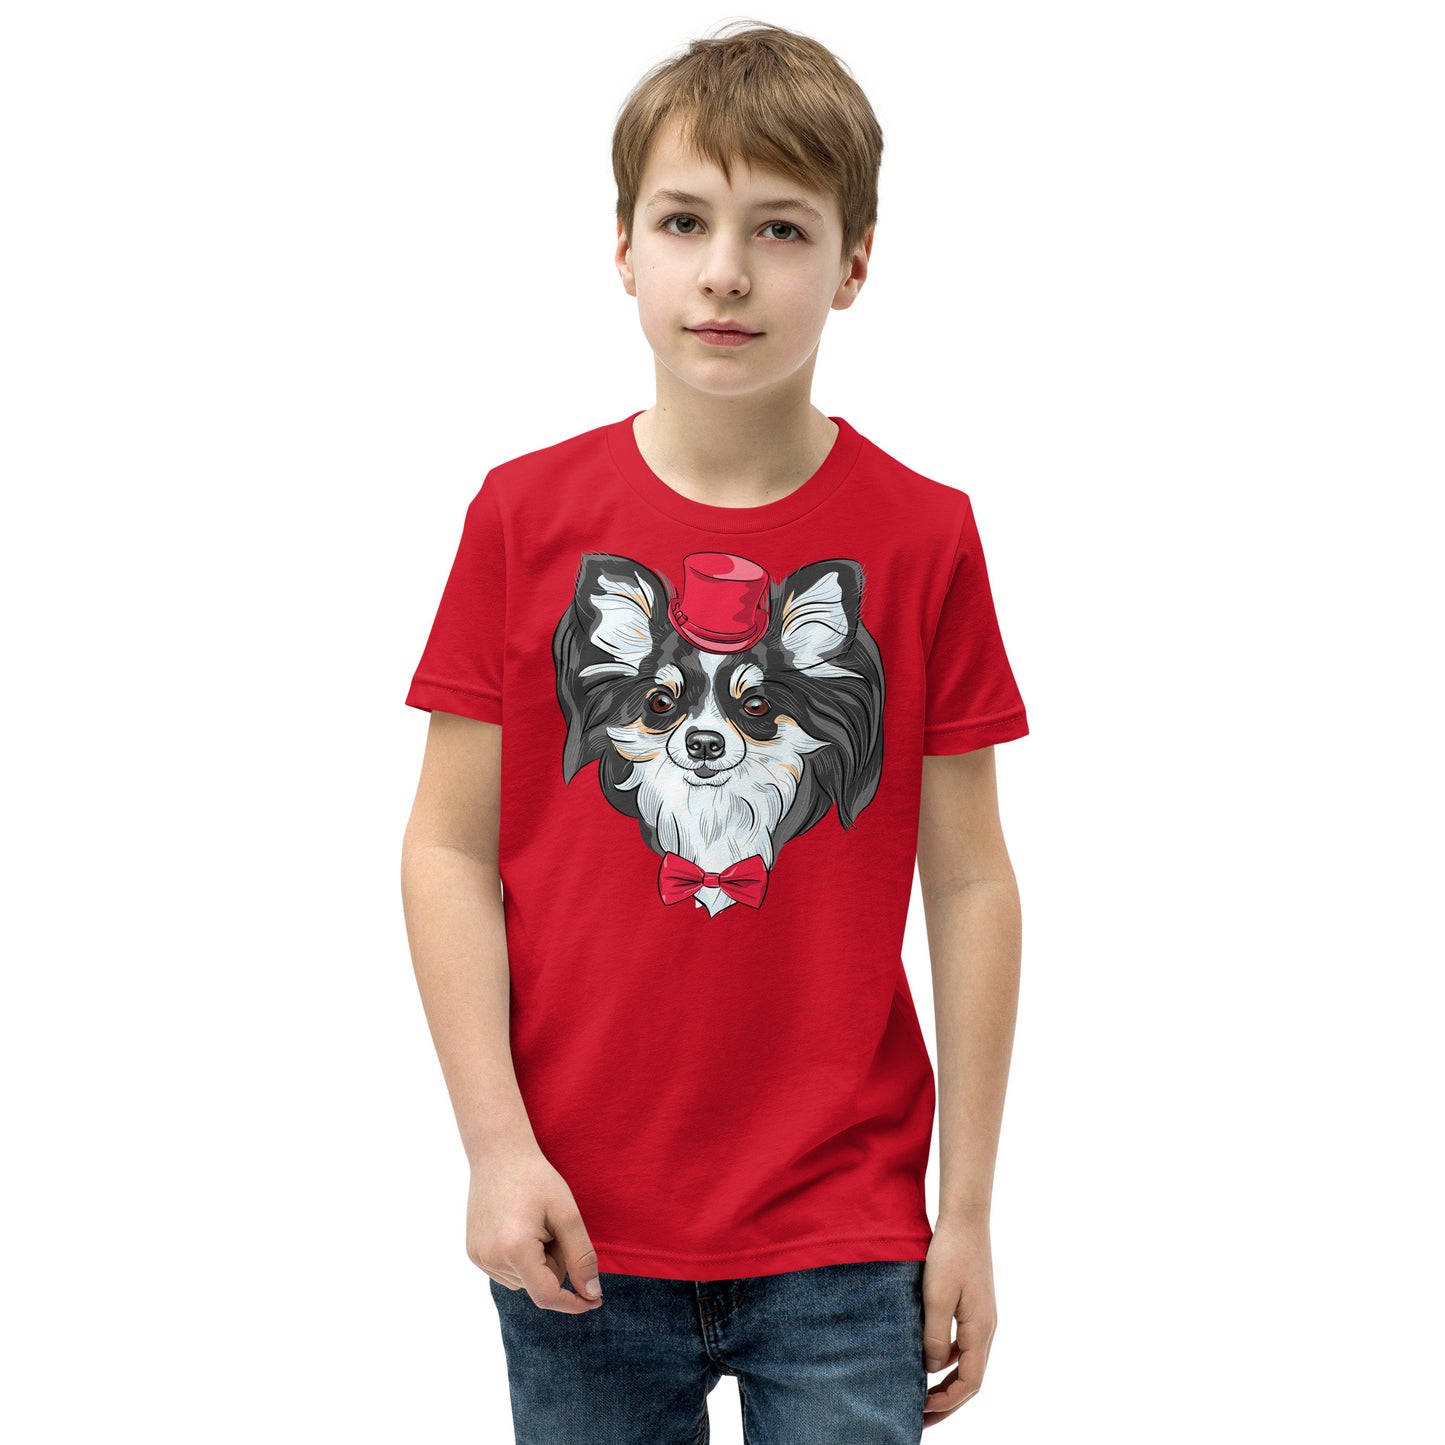 Chihuahua dog wears a red tie T-shirt, No. 0112